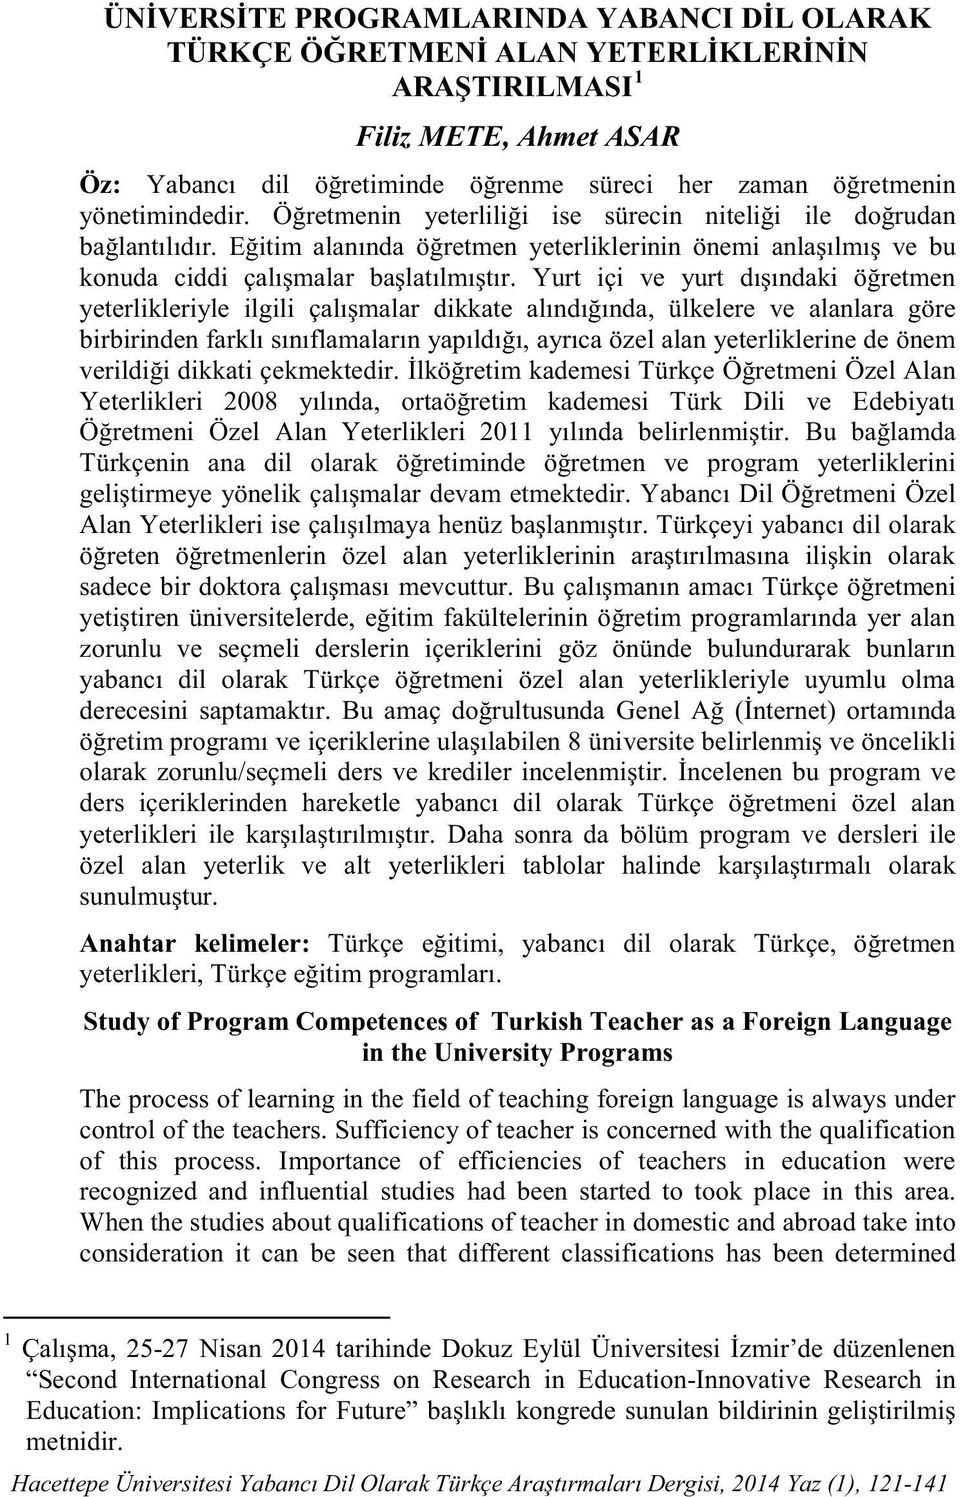 teachers. Sufficiency of teacher is concerned with the qualification of this process.